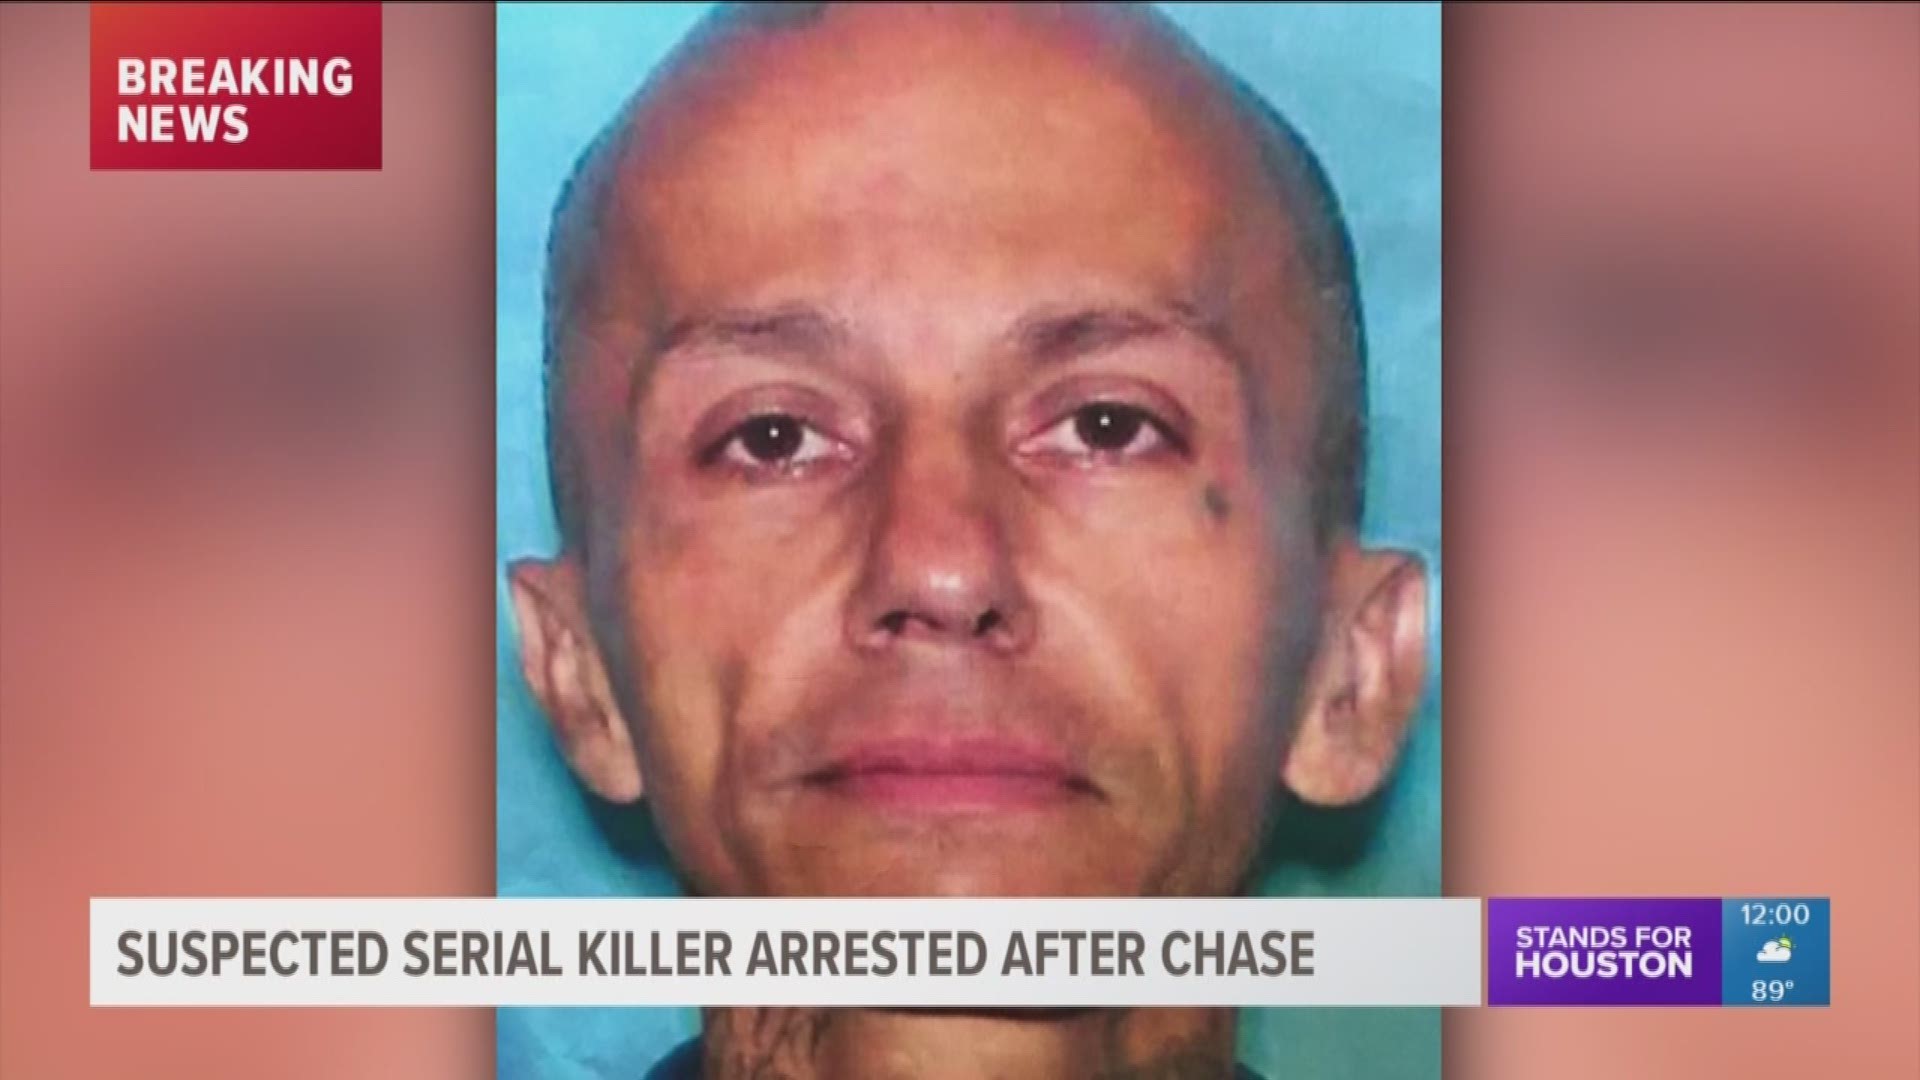 Accused serial killer Jose Gilberto Rodriguez, 46, was arrested following a chase in northwest Harris County Tuesday morning.